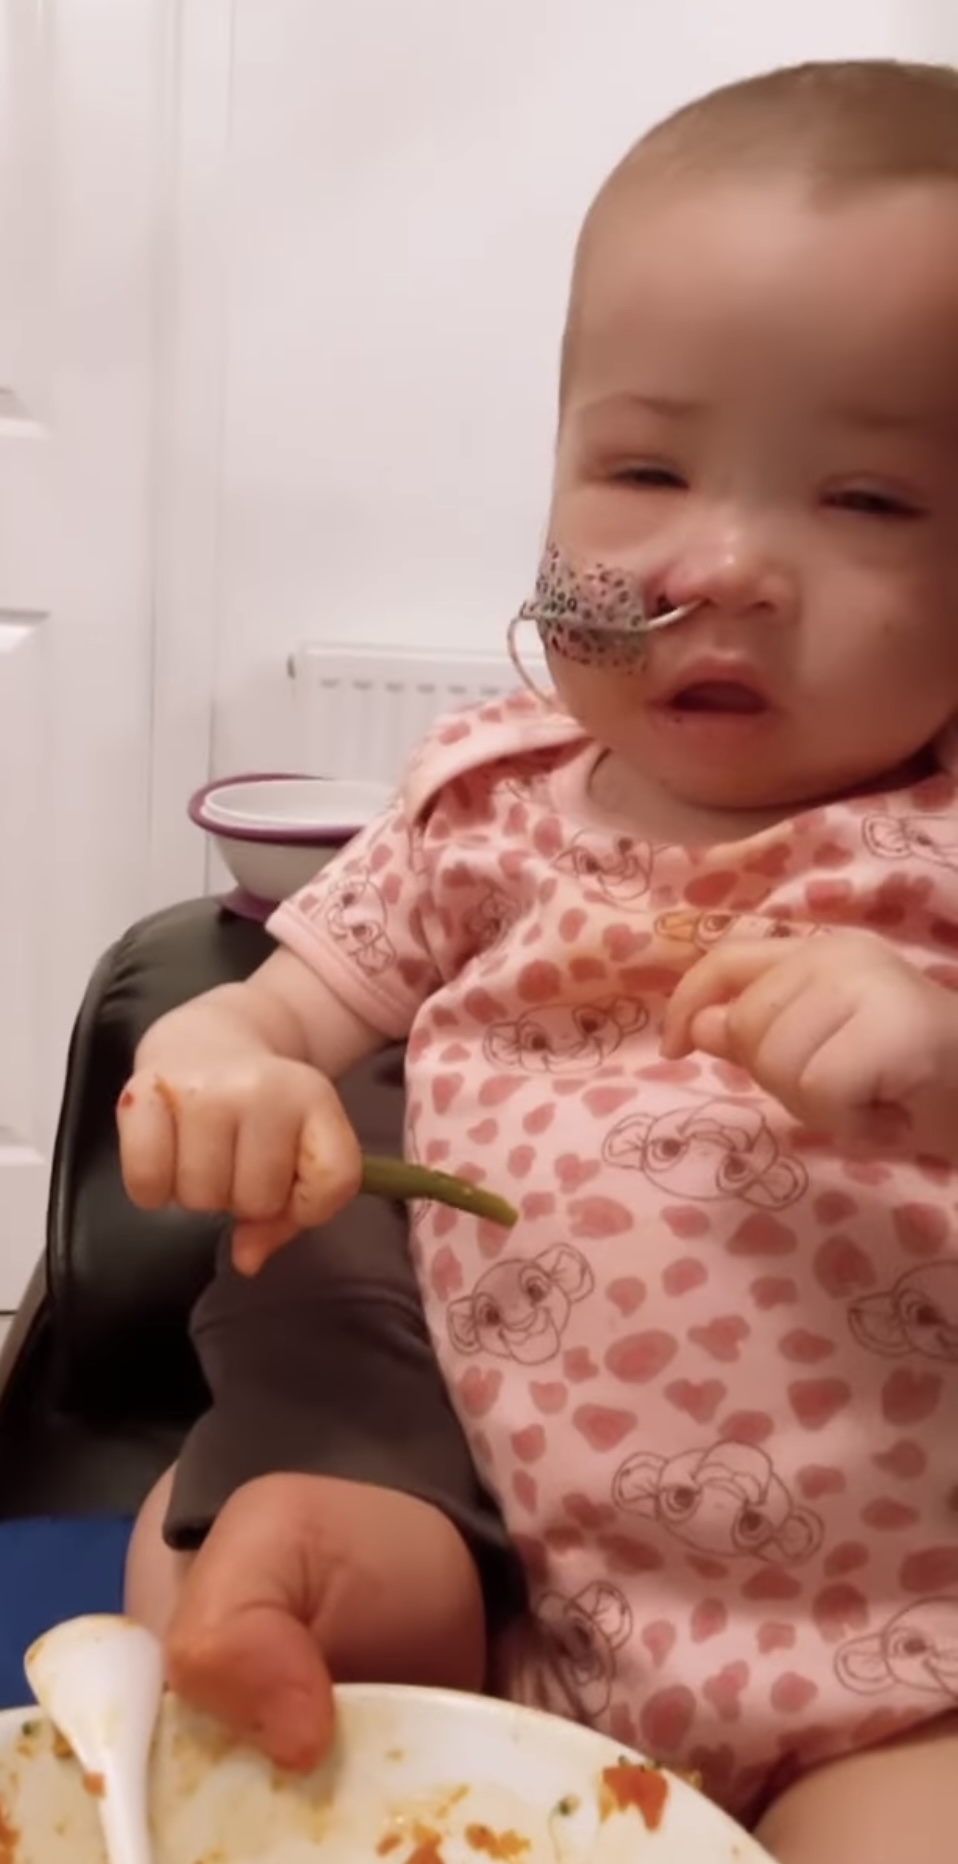 Azaylia Eats For ‘First Time’ In Weeks Amid Devastating Cancer Battle